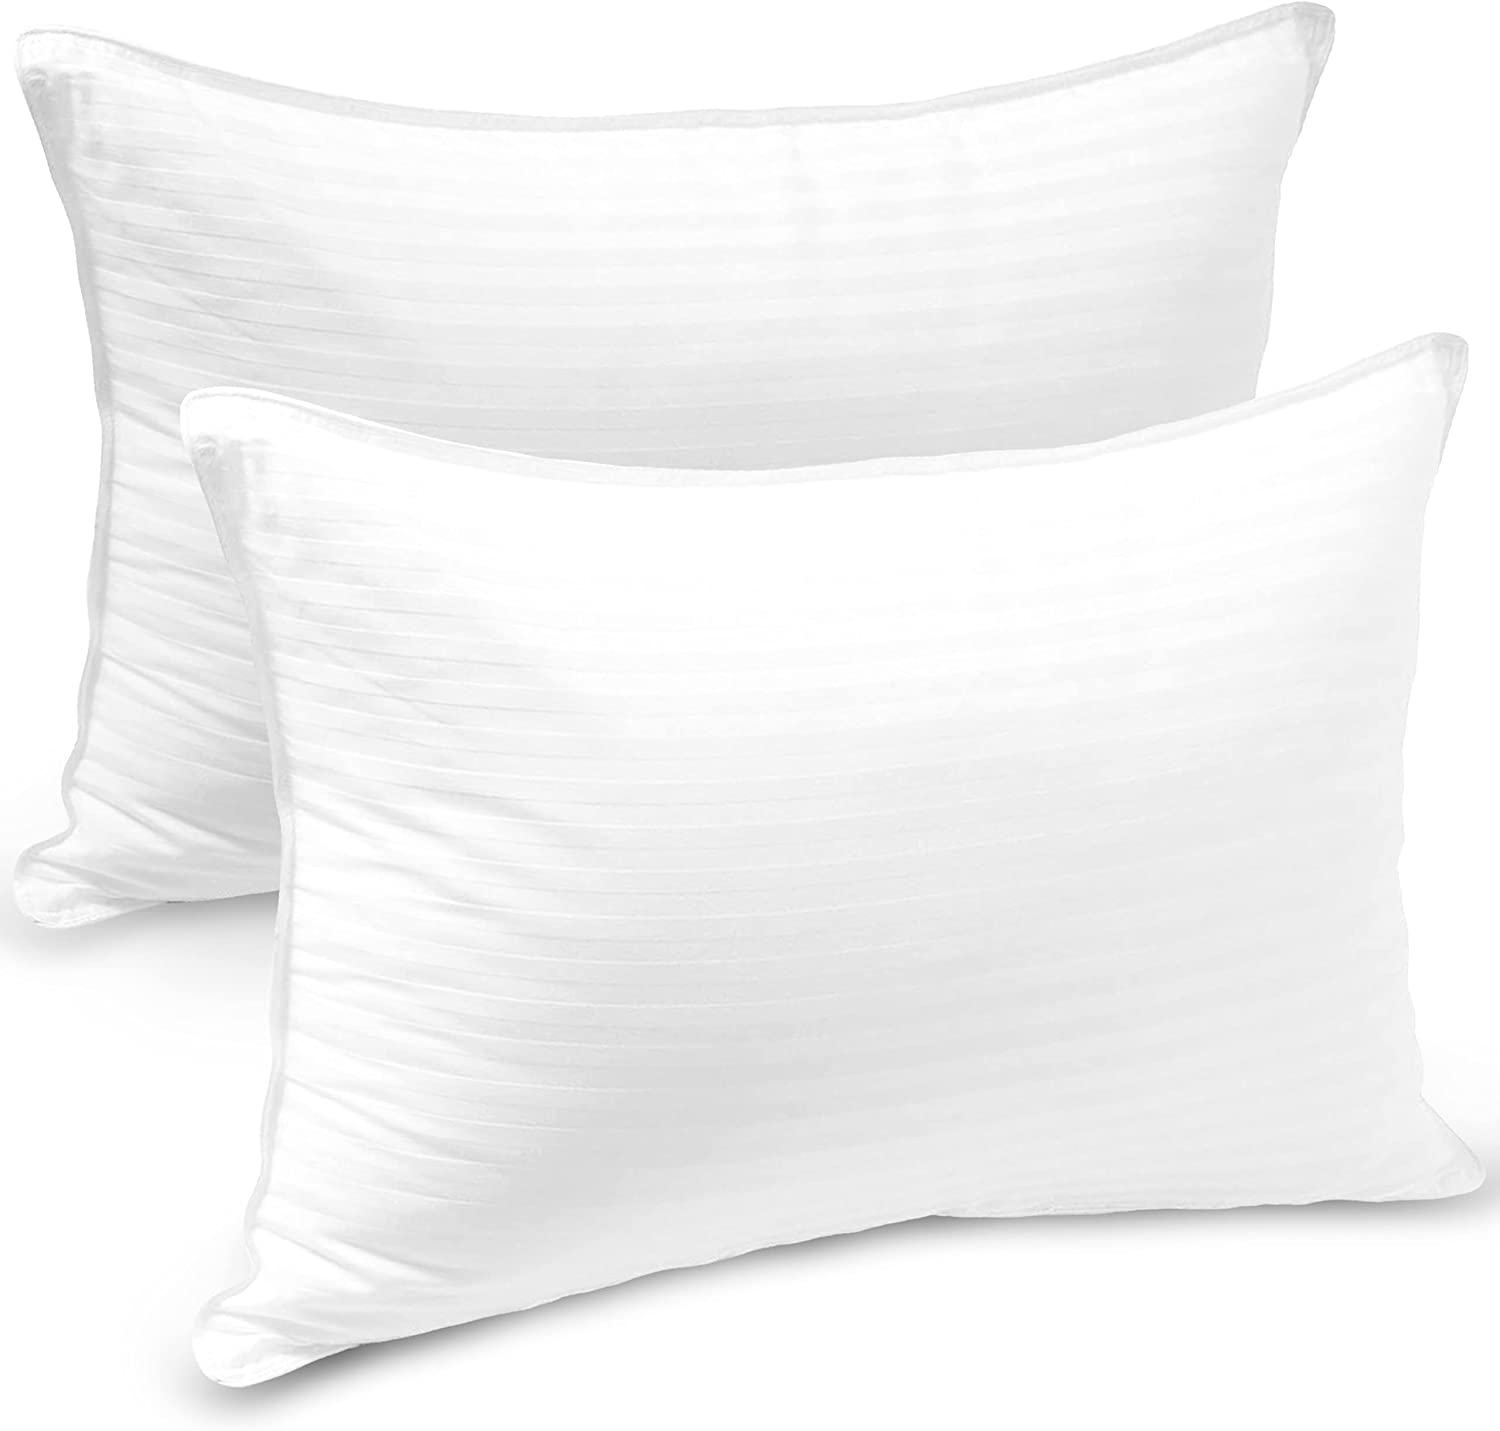 Sleep Restoration Bed Pillows for Sleeping – Queen Size Set of 2, Comfortable Luxury Cooling Pillow for Back Side or Stomach Sleepers - image 1 of 9